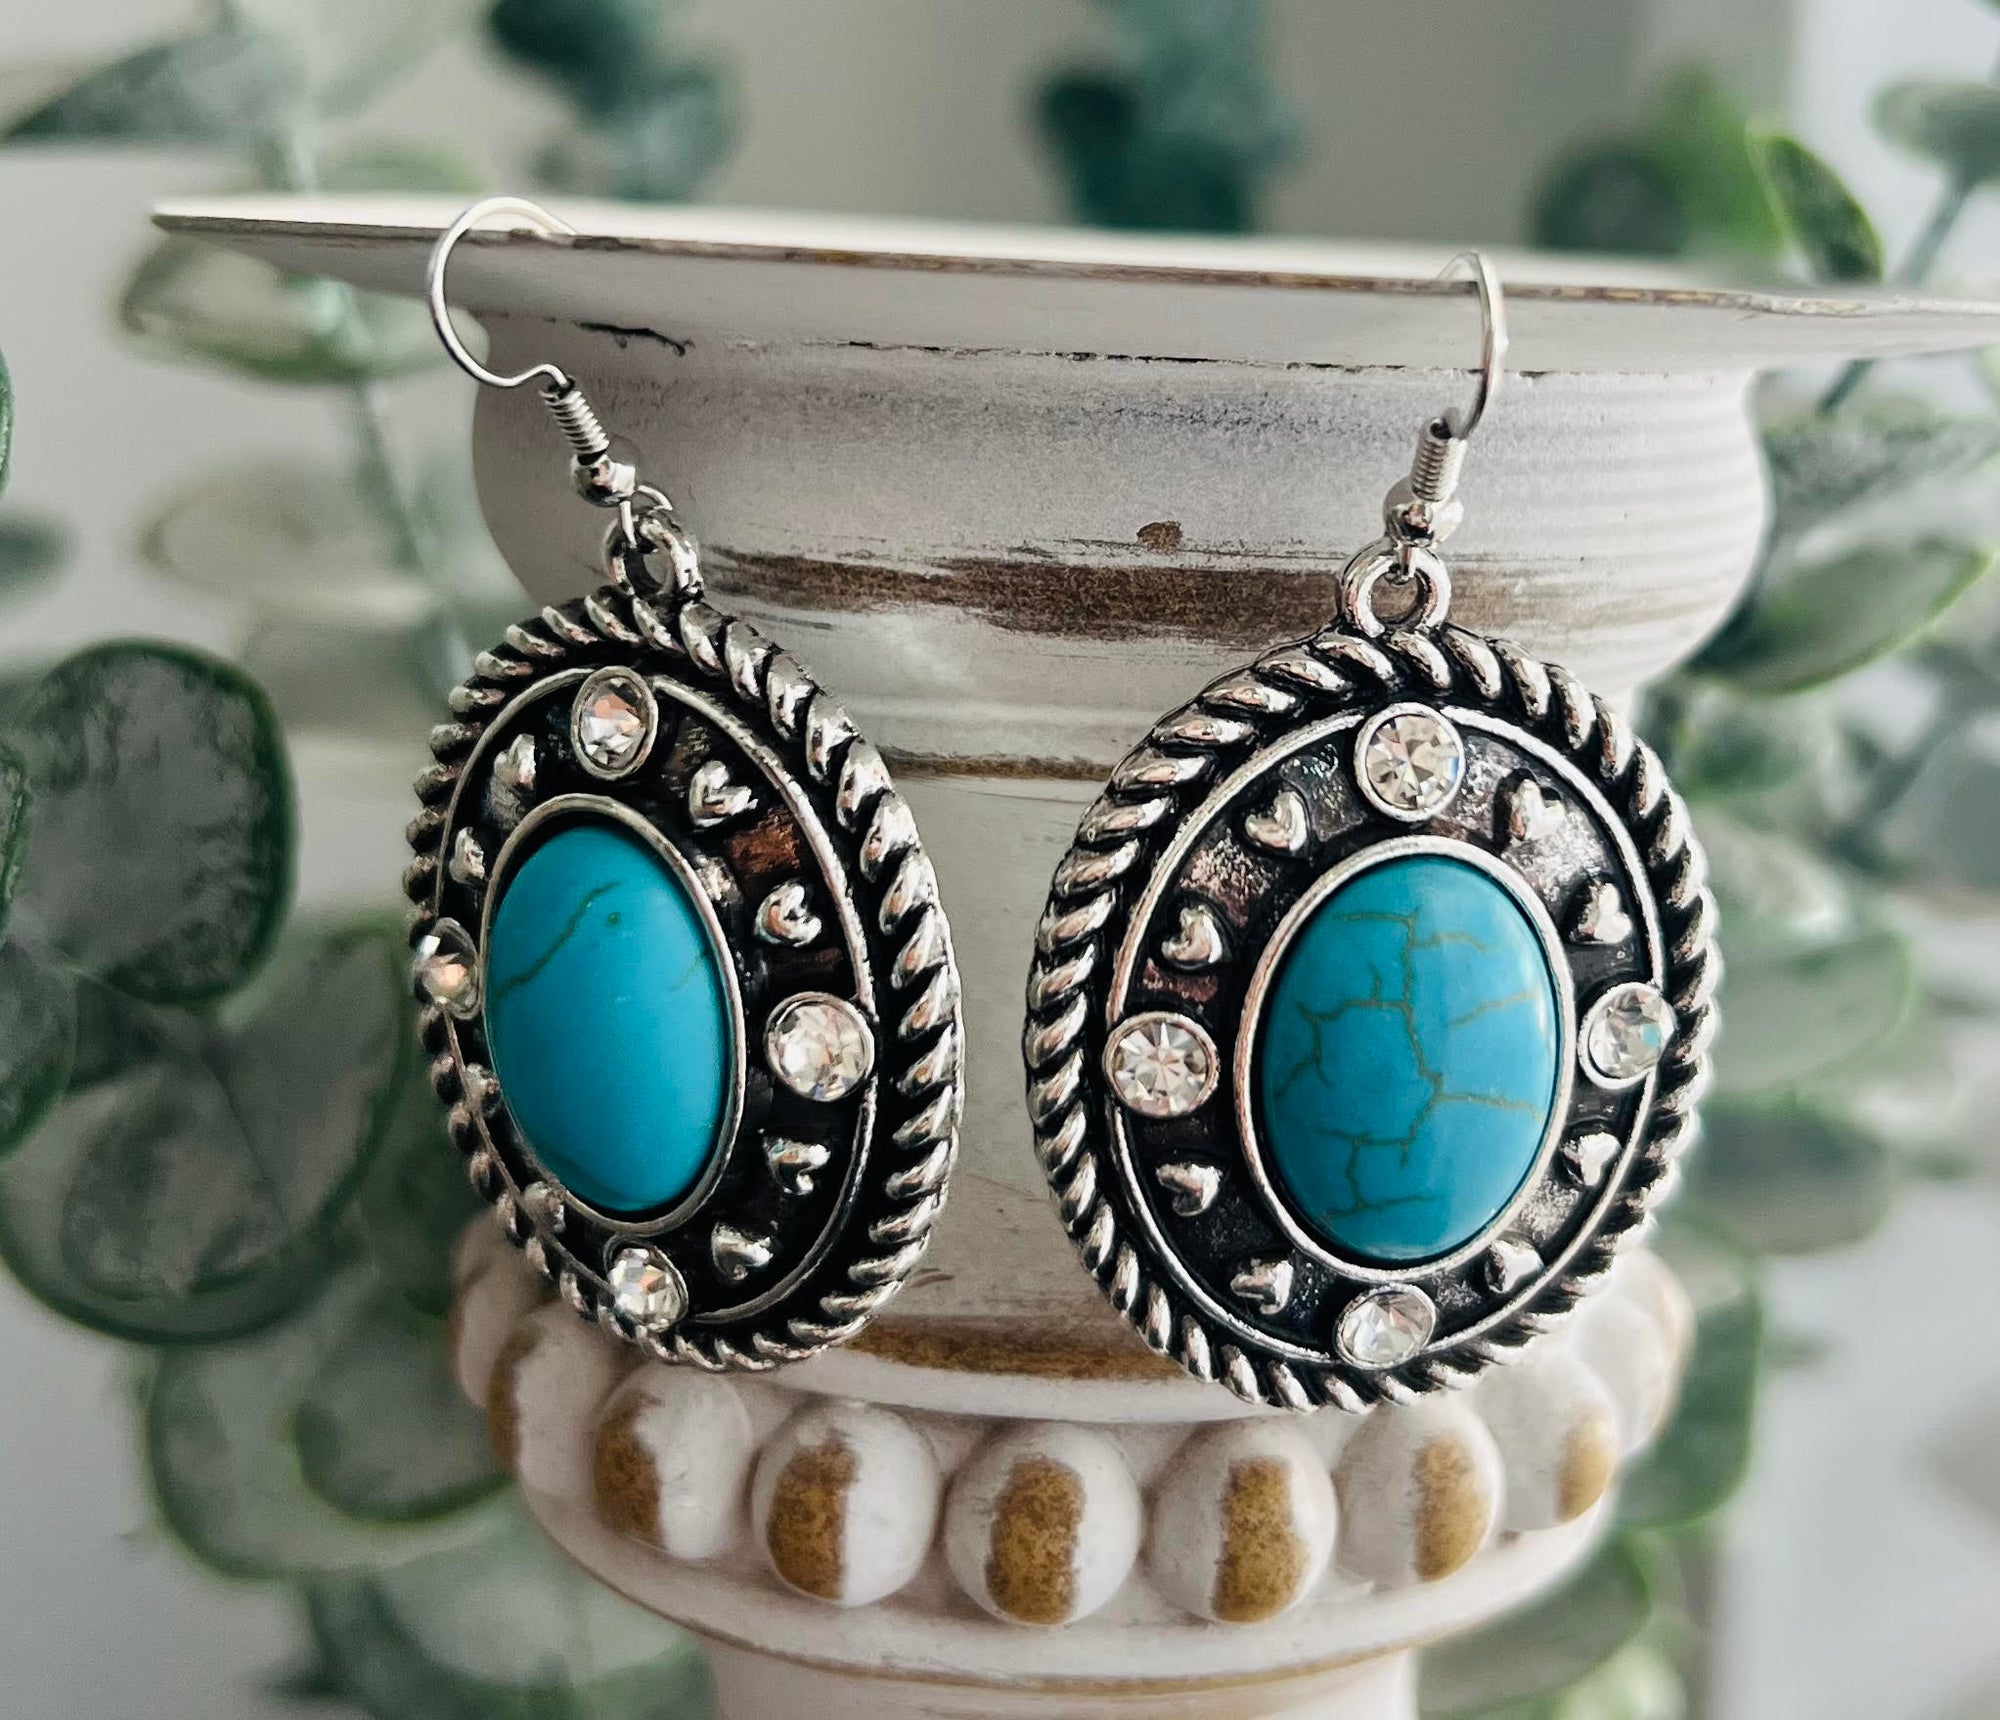 SILVER HEART DESIGN EARRINGS WITH TURQUOISE STONE